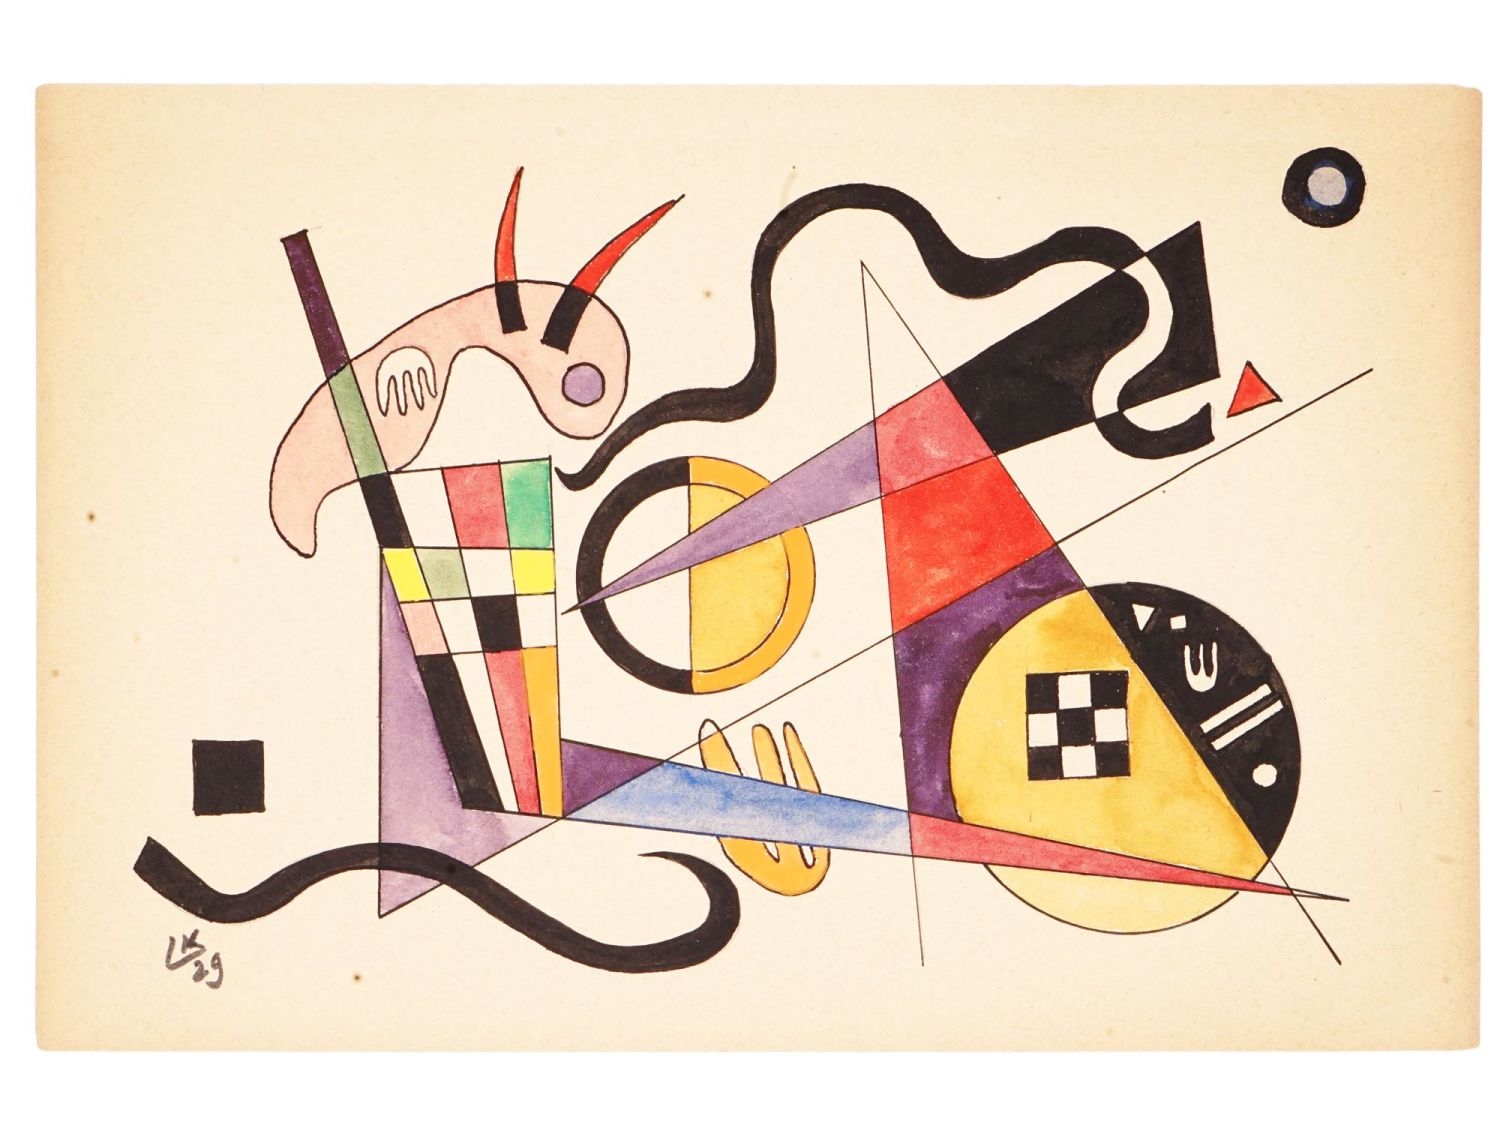 Artwork by Wassily Kandinsky, A WASSILY KANDISKY MIXED MEDIA ABSTRACT PAINTING, 1929, Made of mixed media on paper